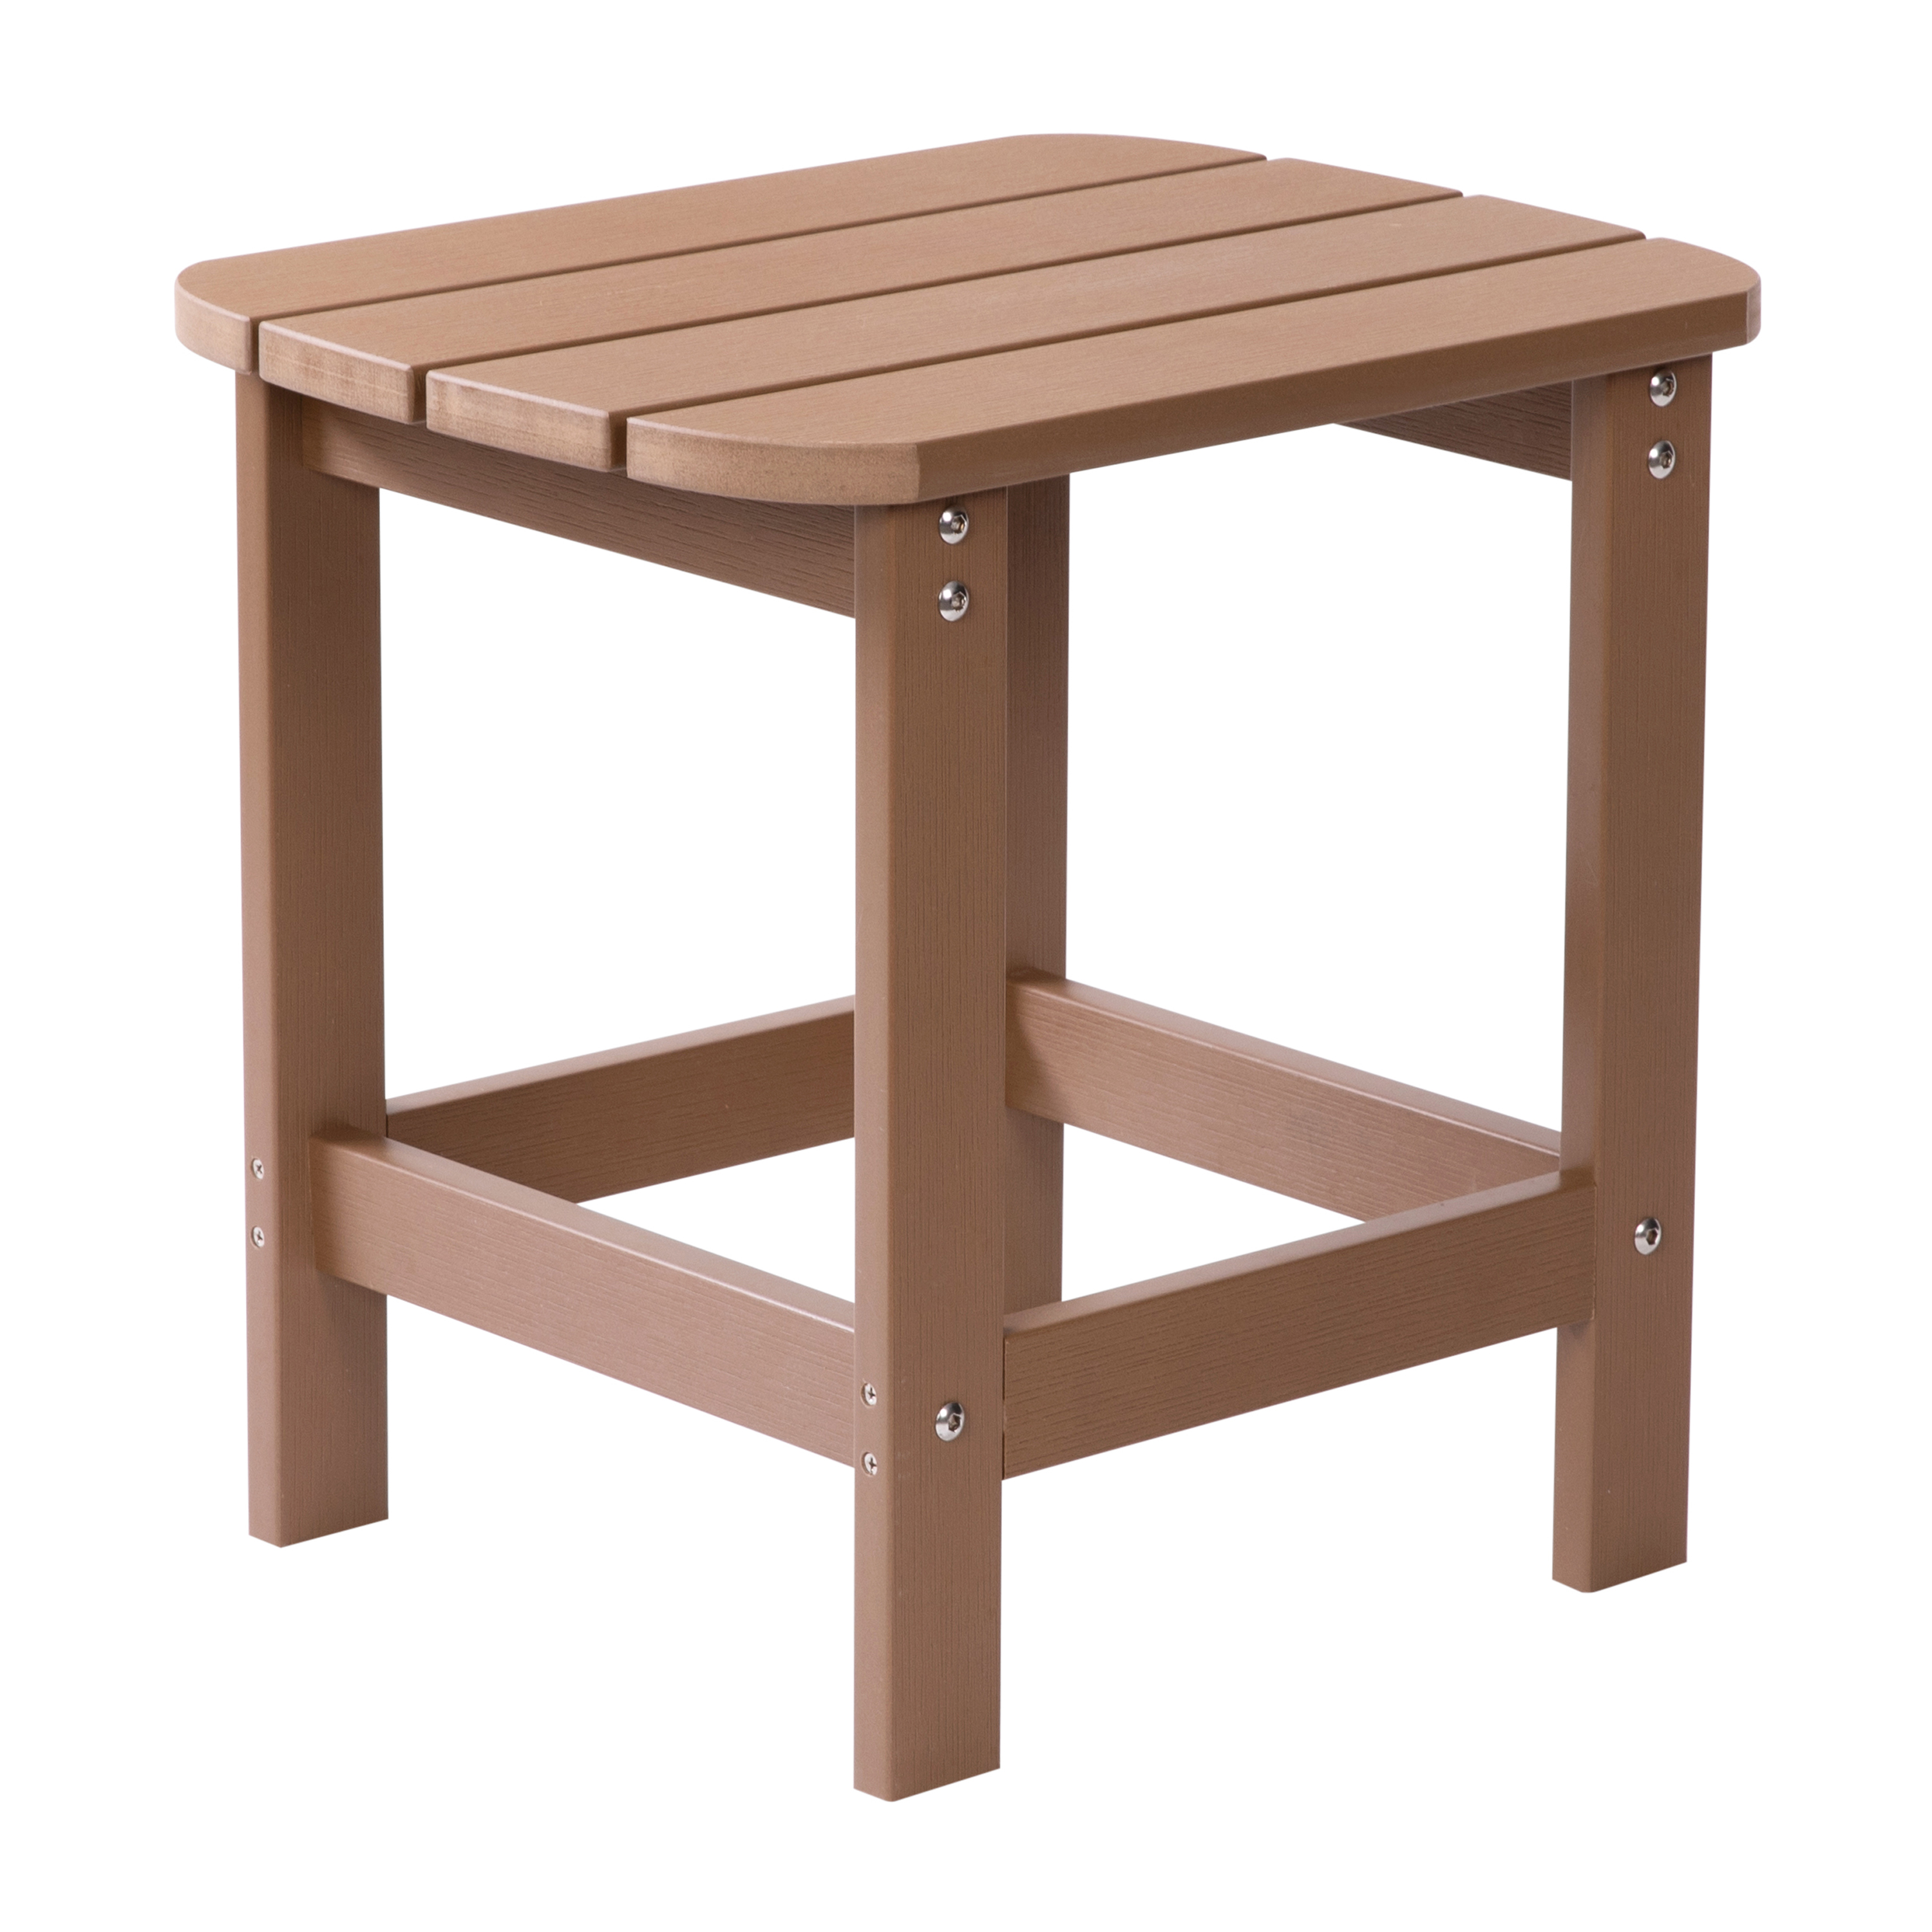 Flash Furniture Charlestown All-Weather Poly Resin Wood Commercial Grade Adirondack Side Table in Natural Cedar - image 1 of 11